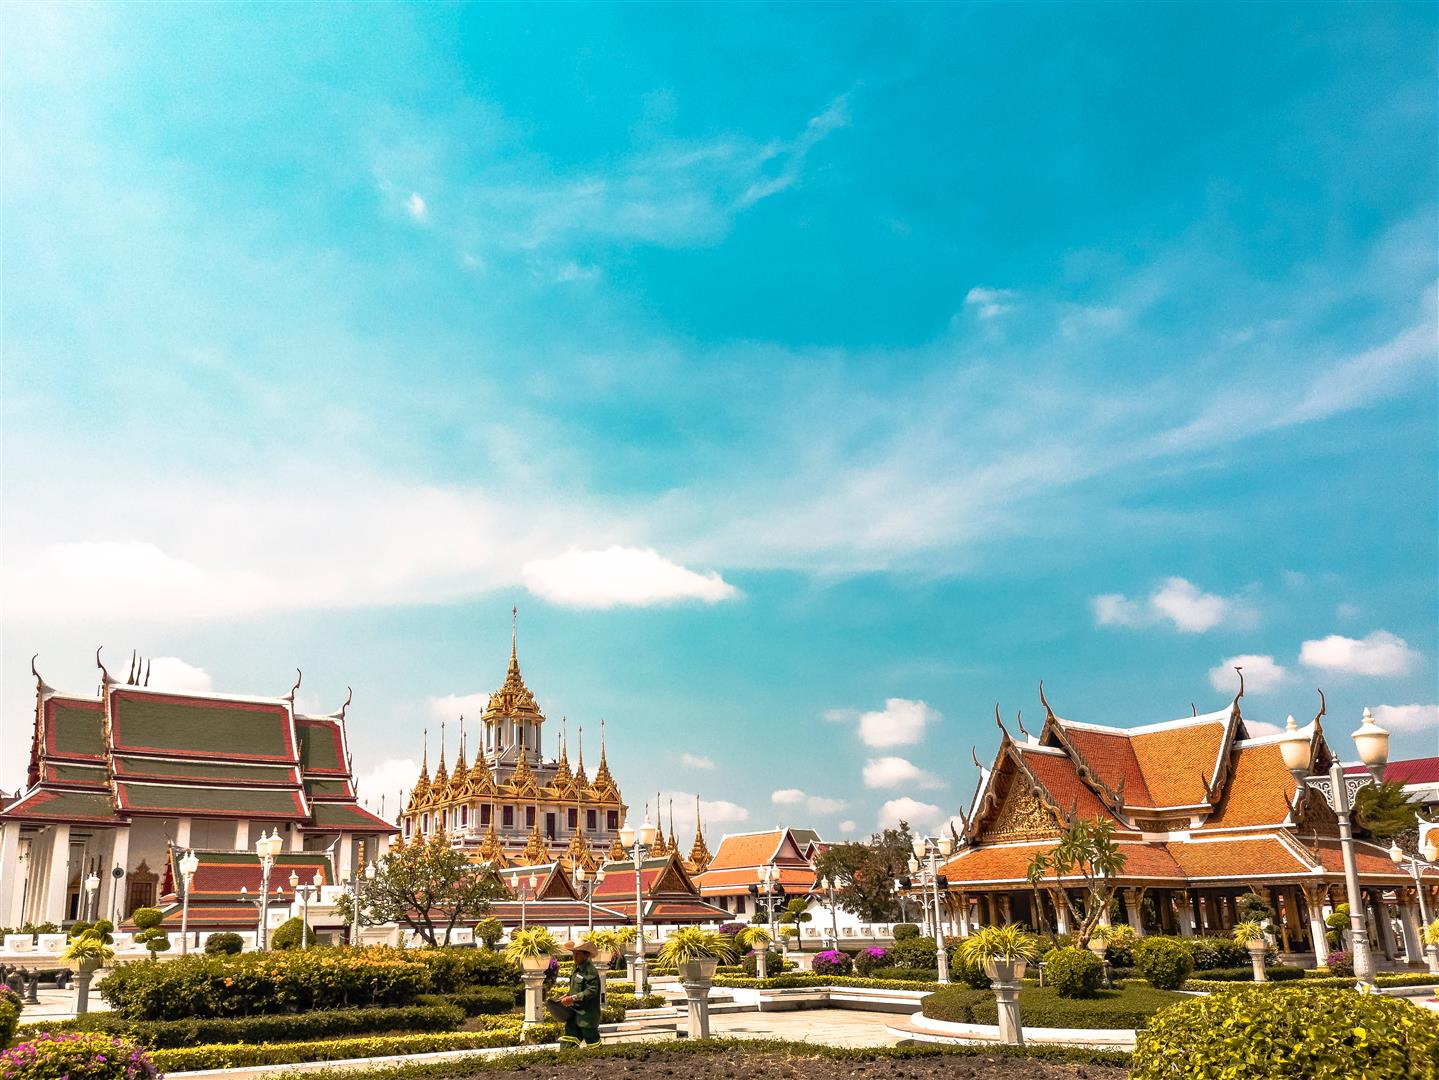 “Smart City” criteria to win the hearts of both Thais and foreigners